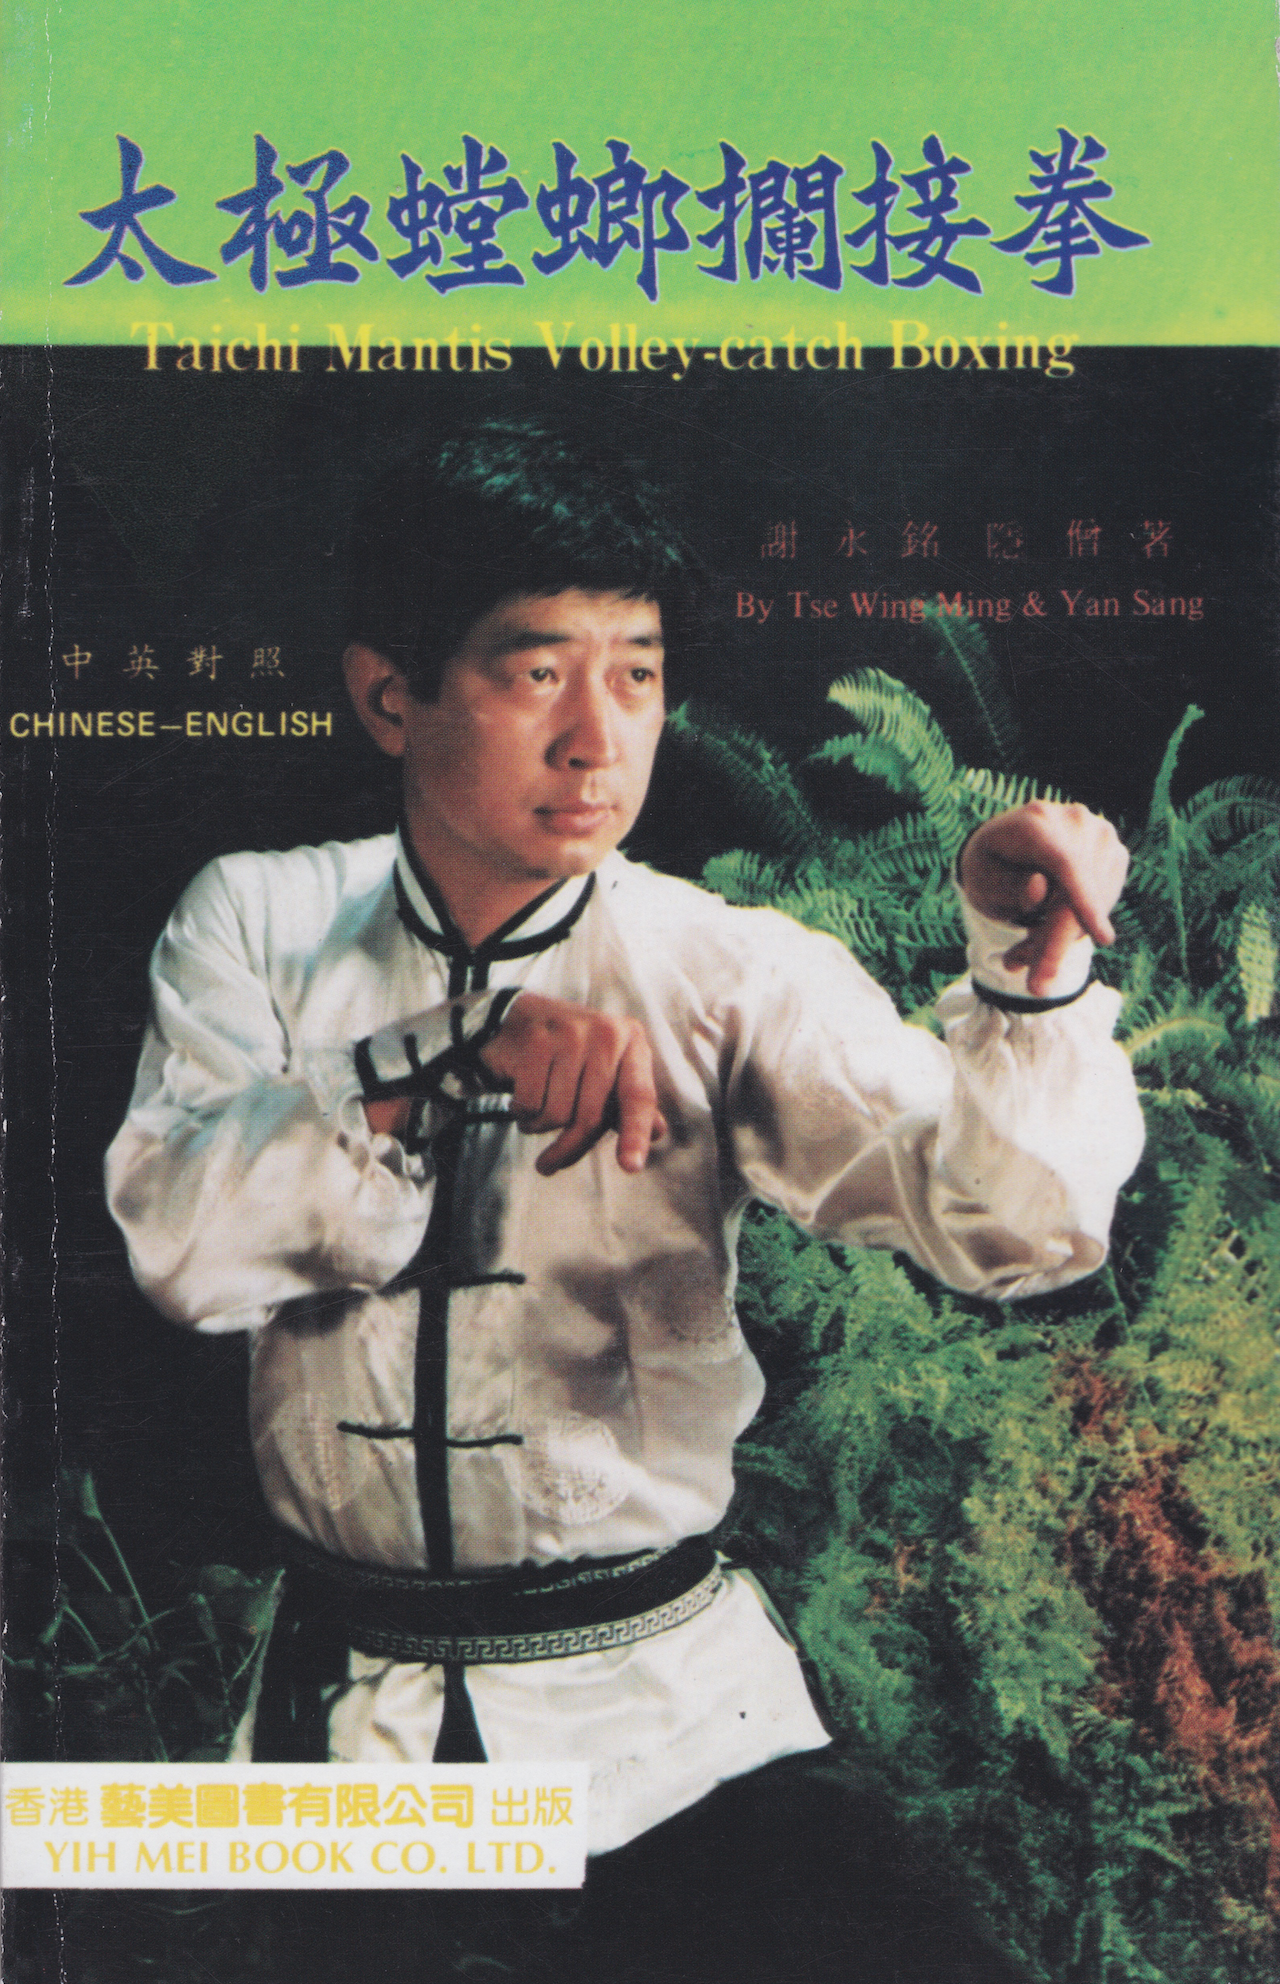 Taichi Mantis Volley Catch Boxing Book by Tse Wing Ming